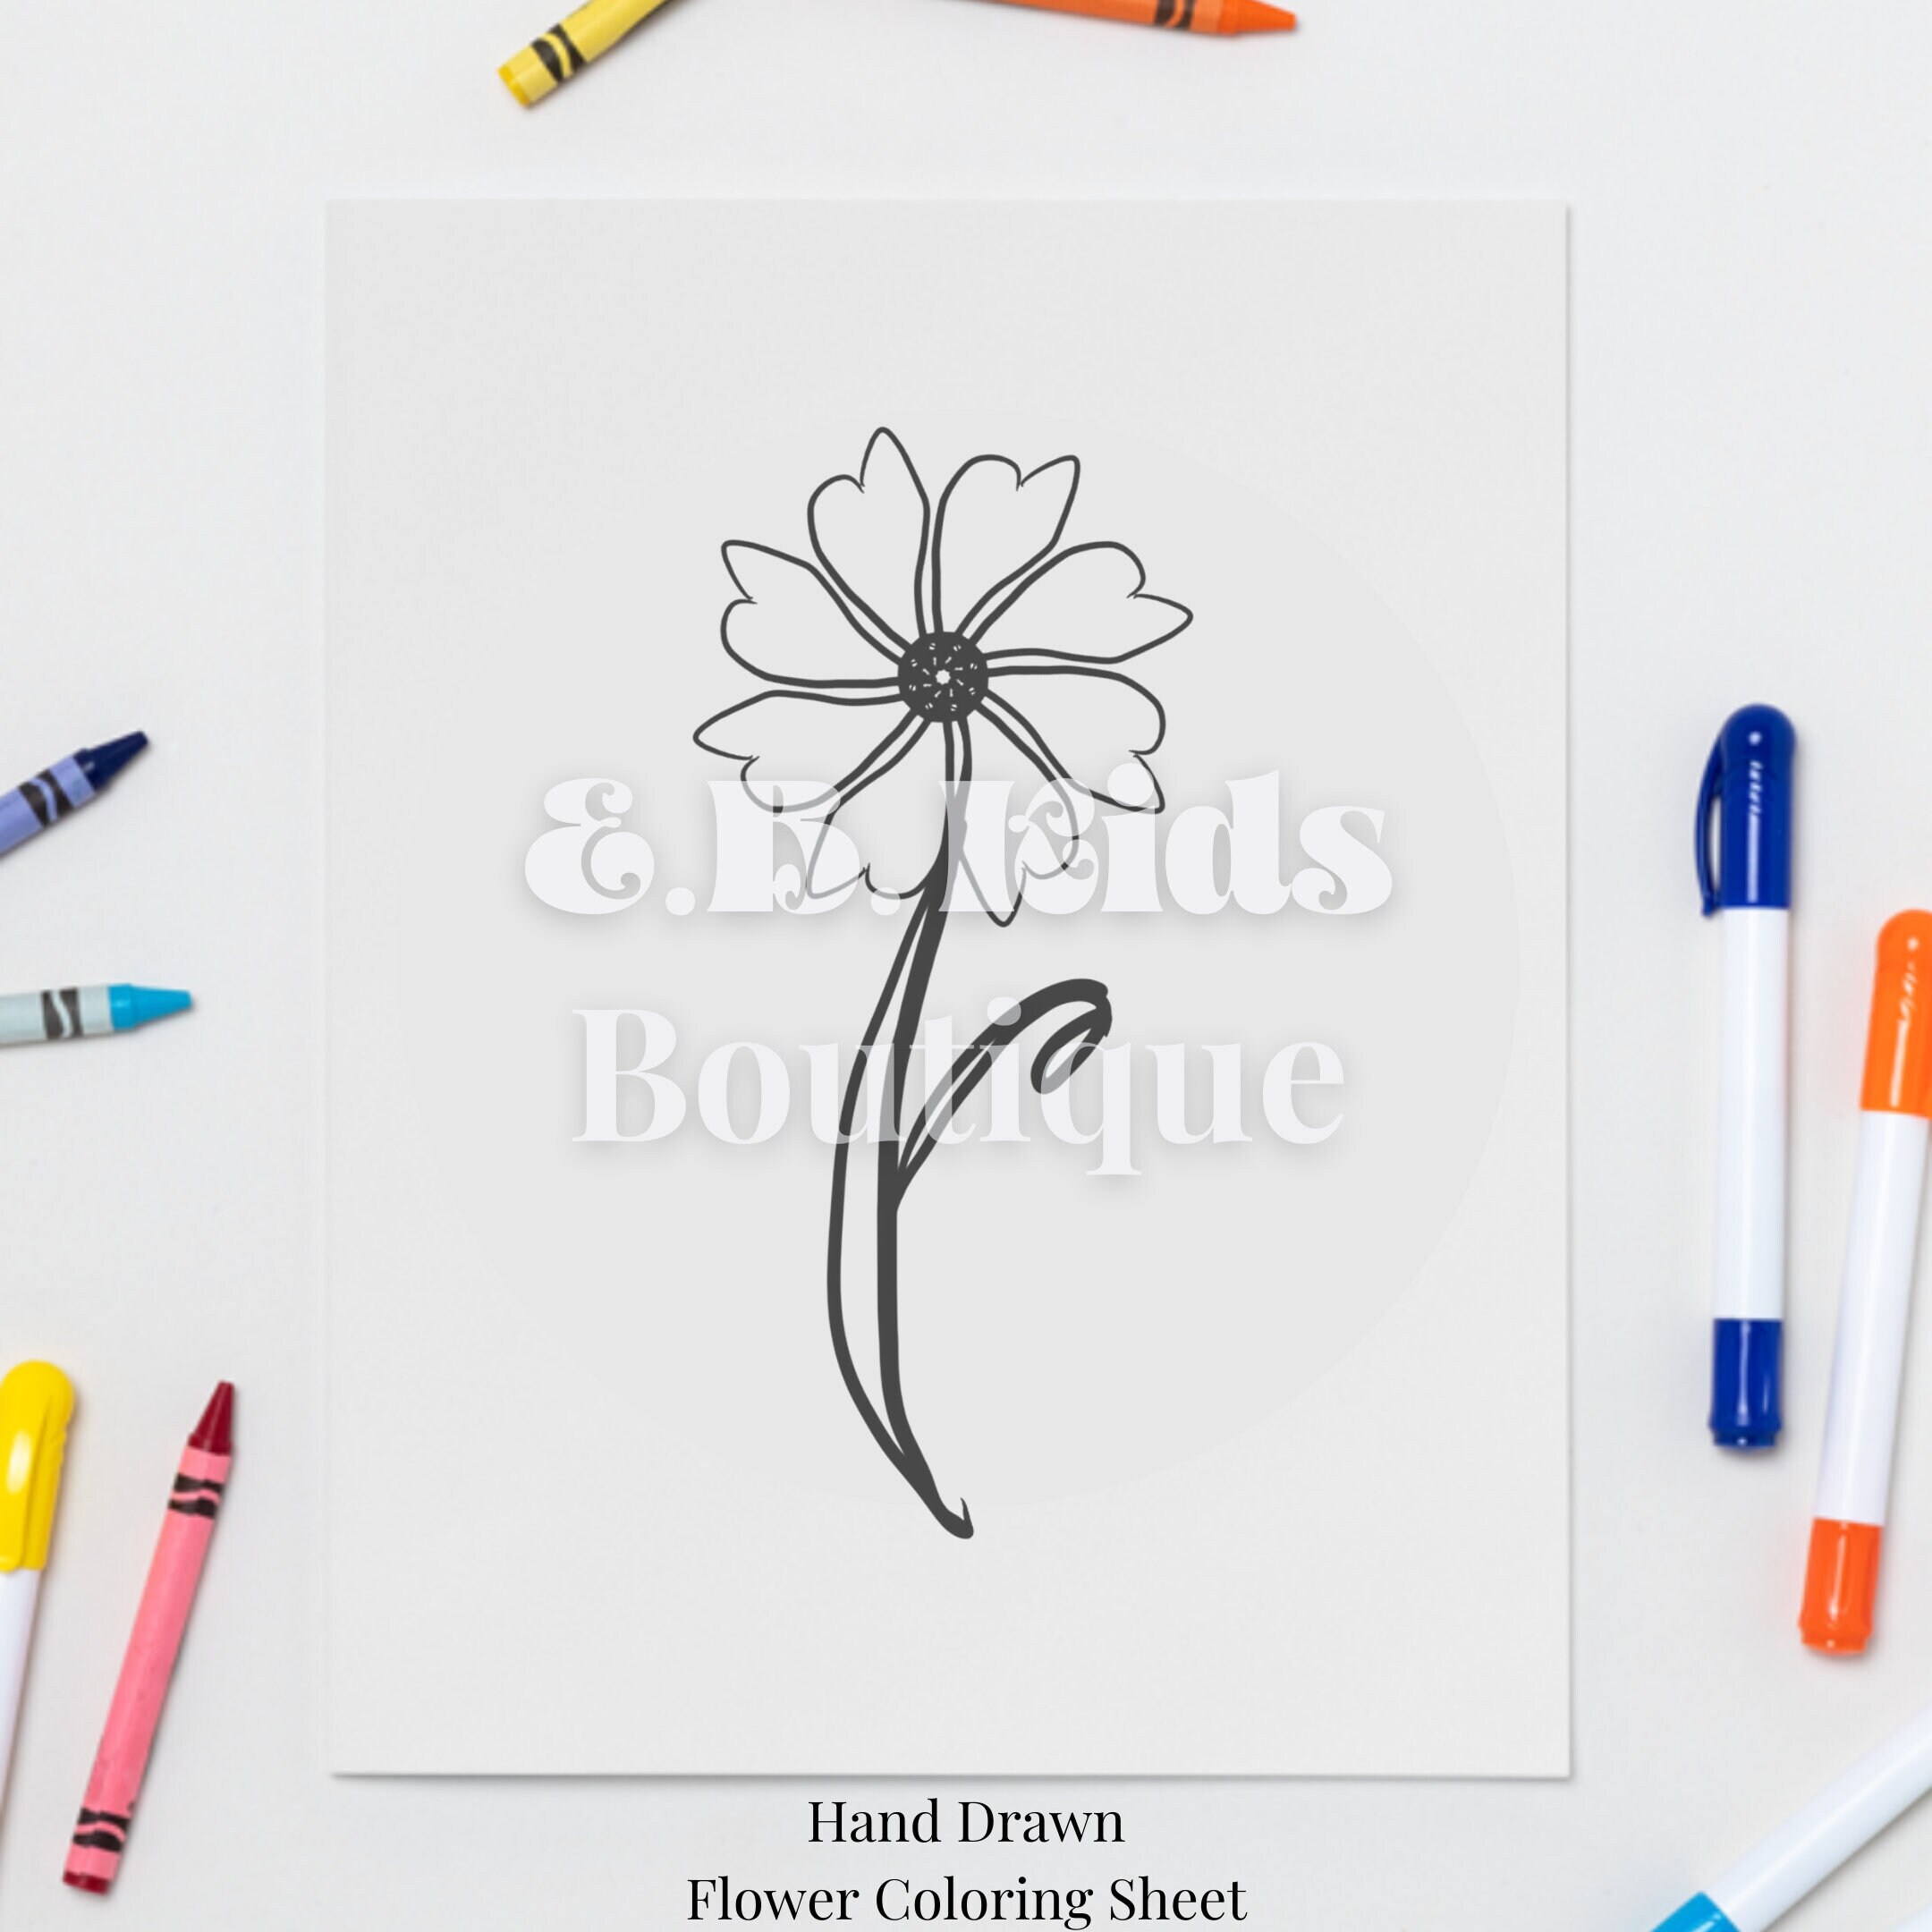 Flower Coloring Book Page in Volume 2 |  Use In Canva  | Hand Drawn, Ready-to-print Digital | Purchase Includes Up To 30 Bonus Pages